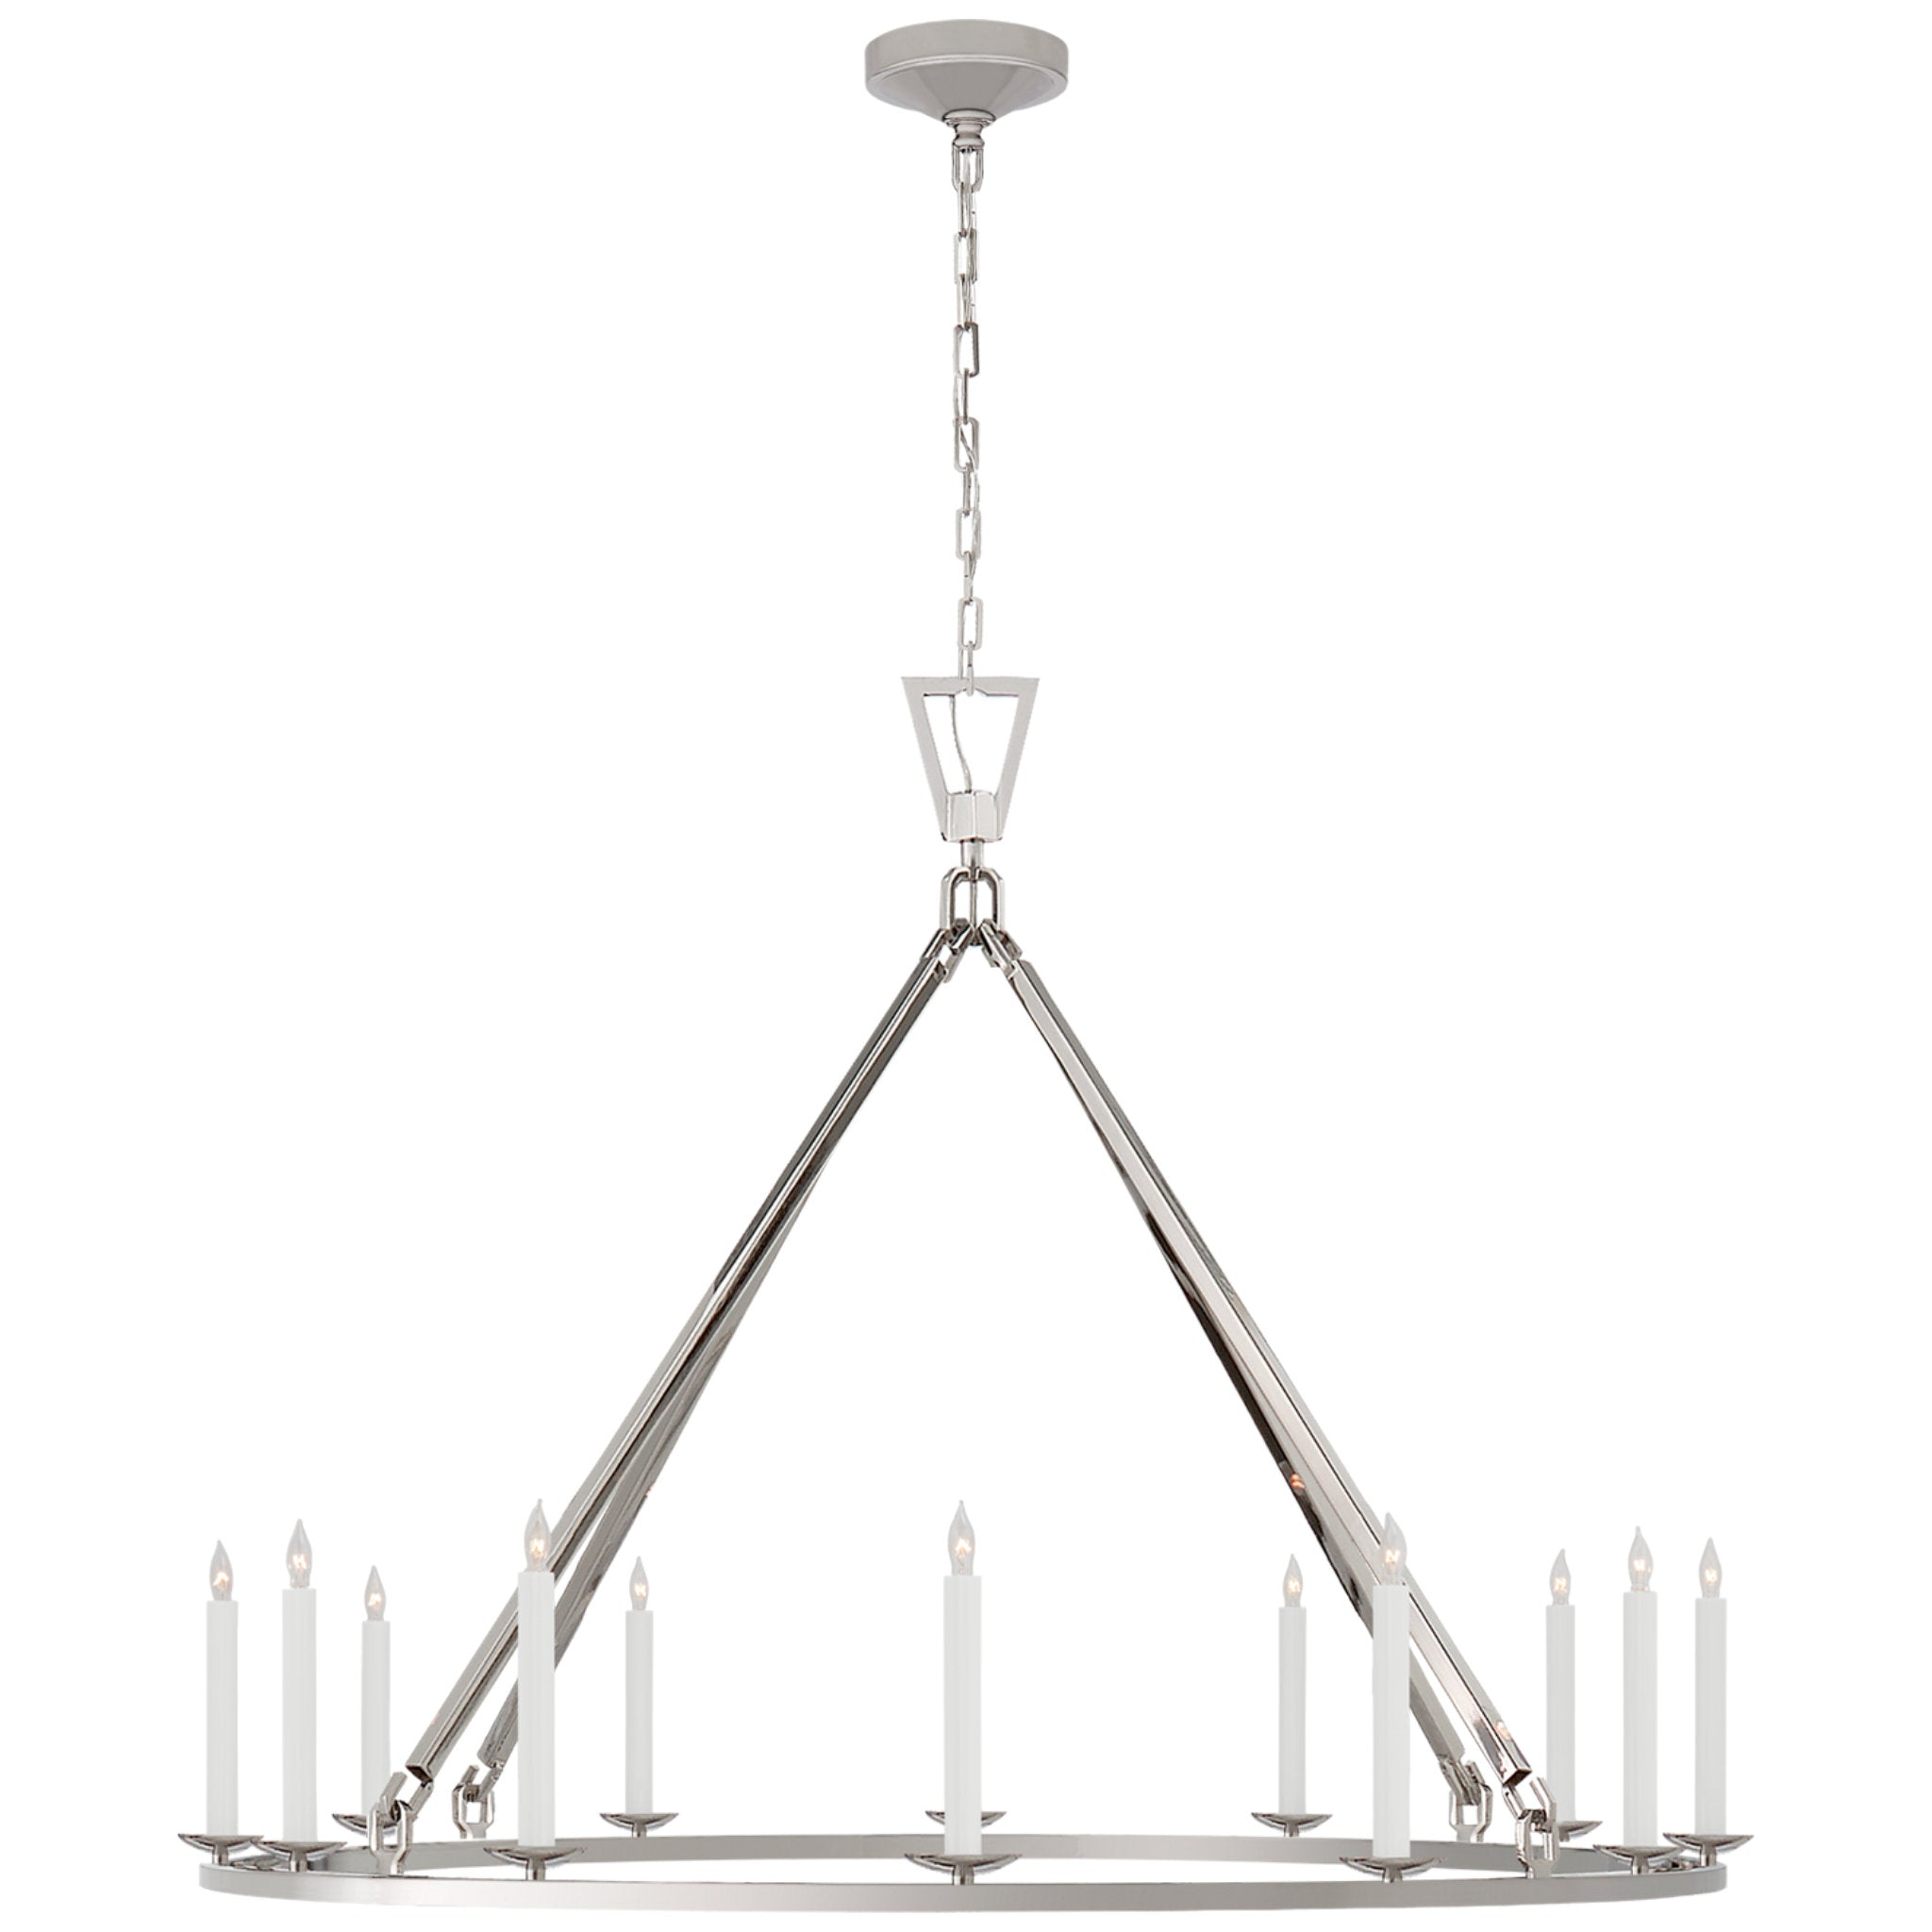 Chapman & Myers Darlana Extra Large Single Ring Chandelier in Polished Nickel